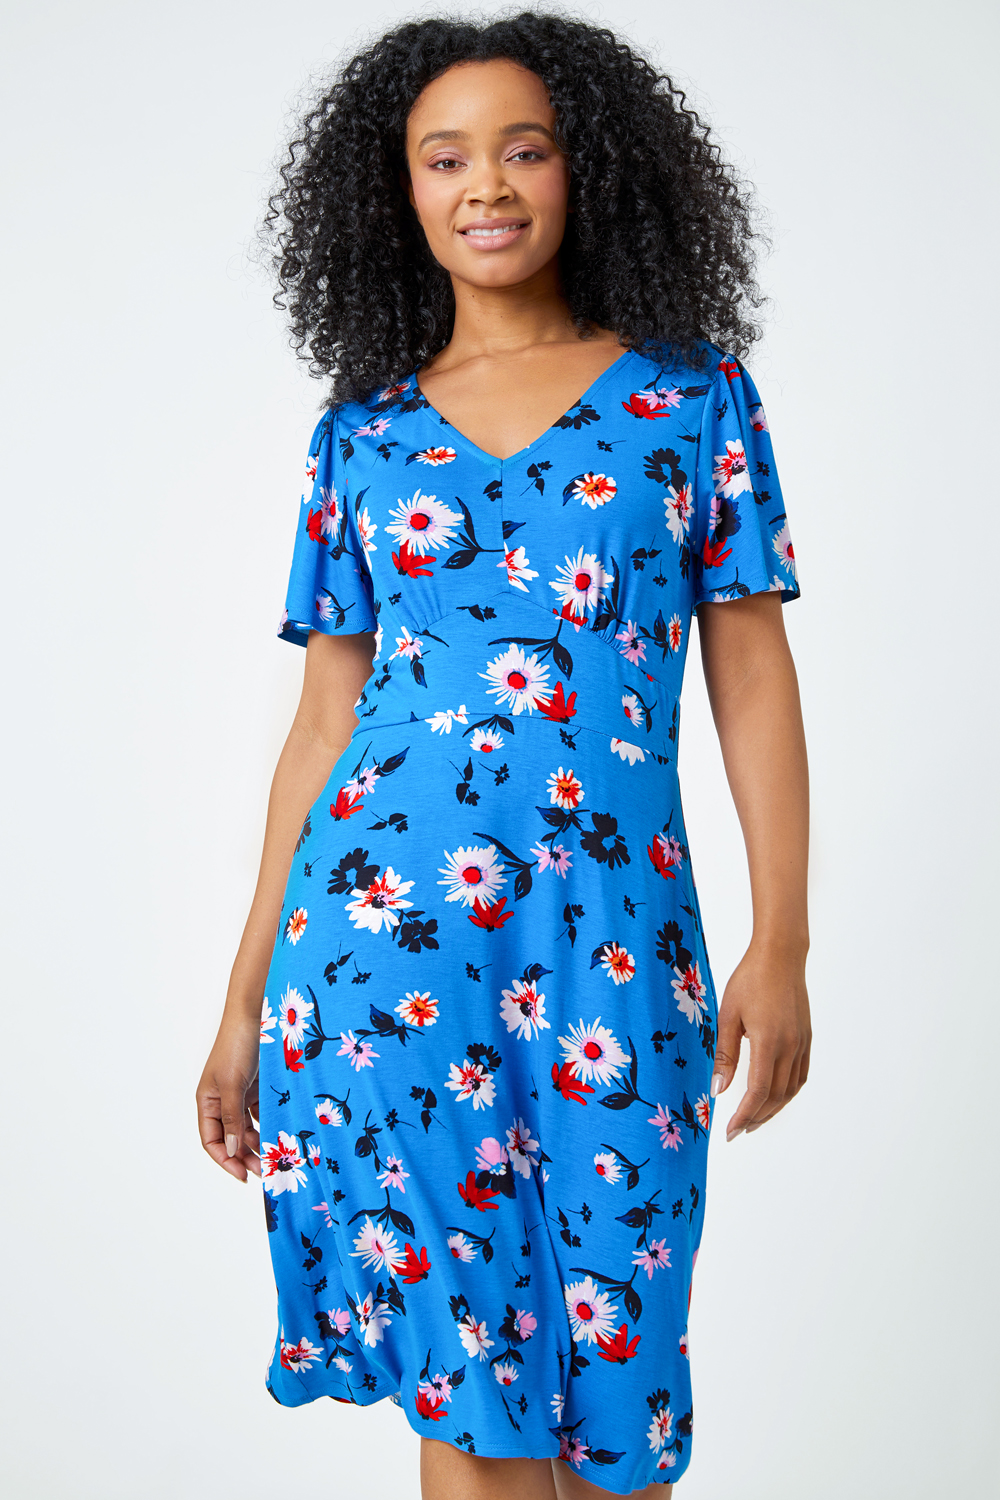 Turquoise Petite Floral Print Stretch Dress, Image 2 of 5